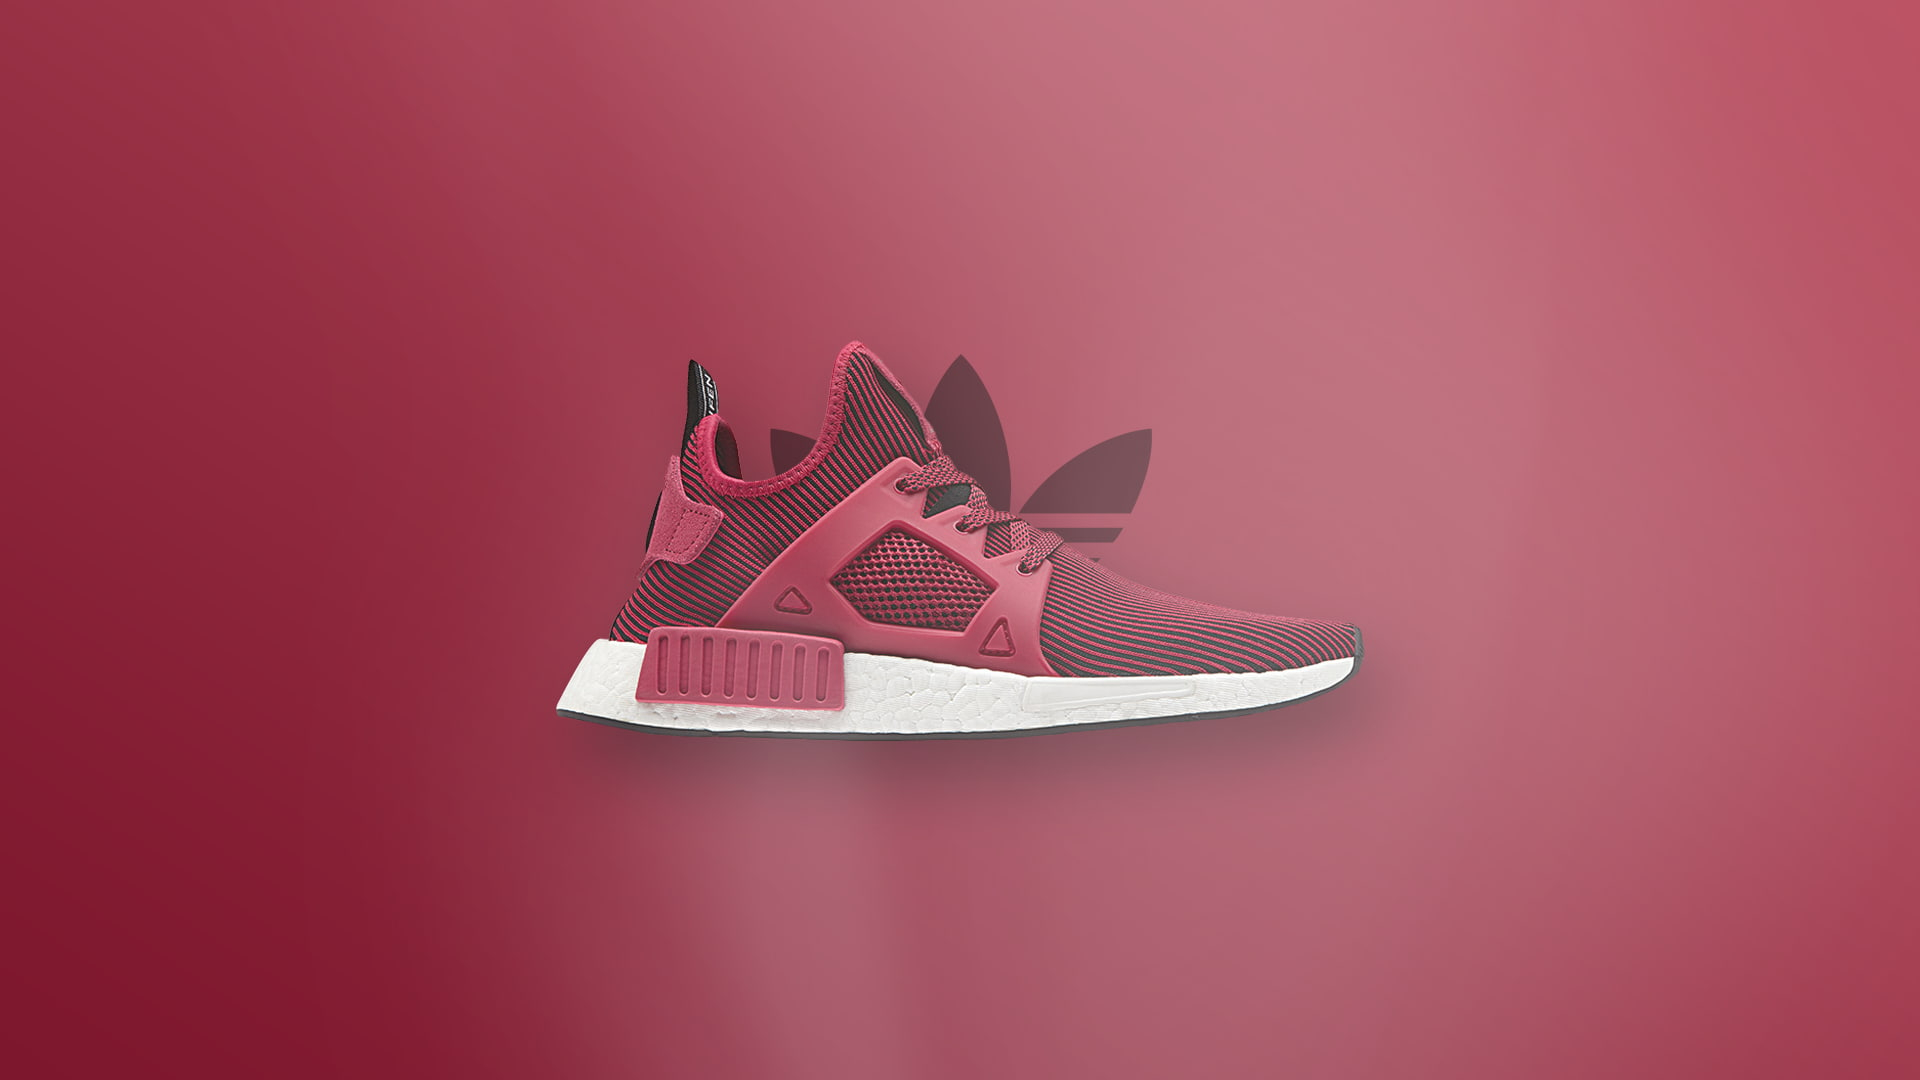 Manufacturing Ride moderately Adidas Wallpaper, Sneakers, Pink Shoes, NMD R1 - Wallpaperforu